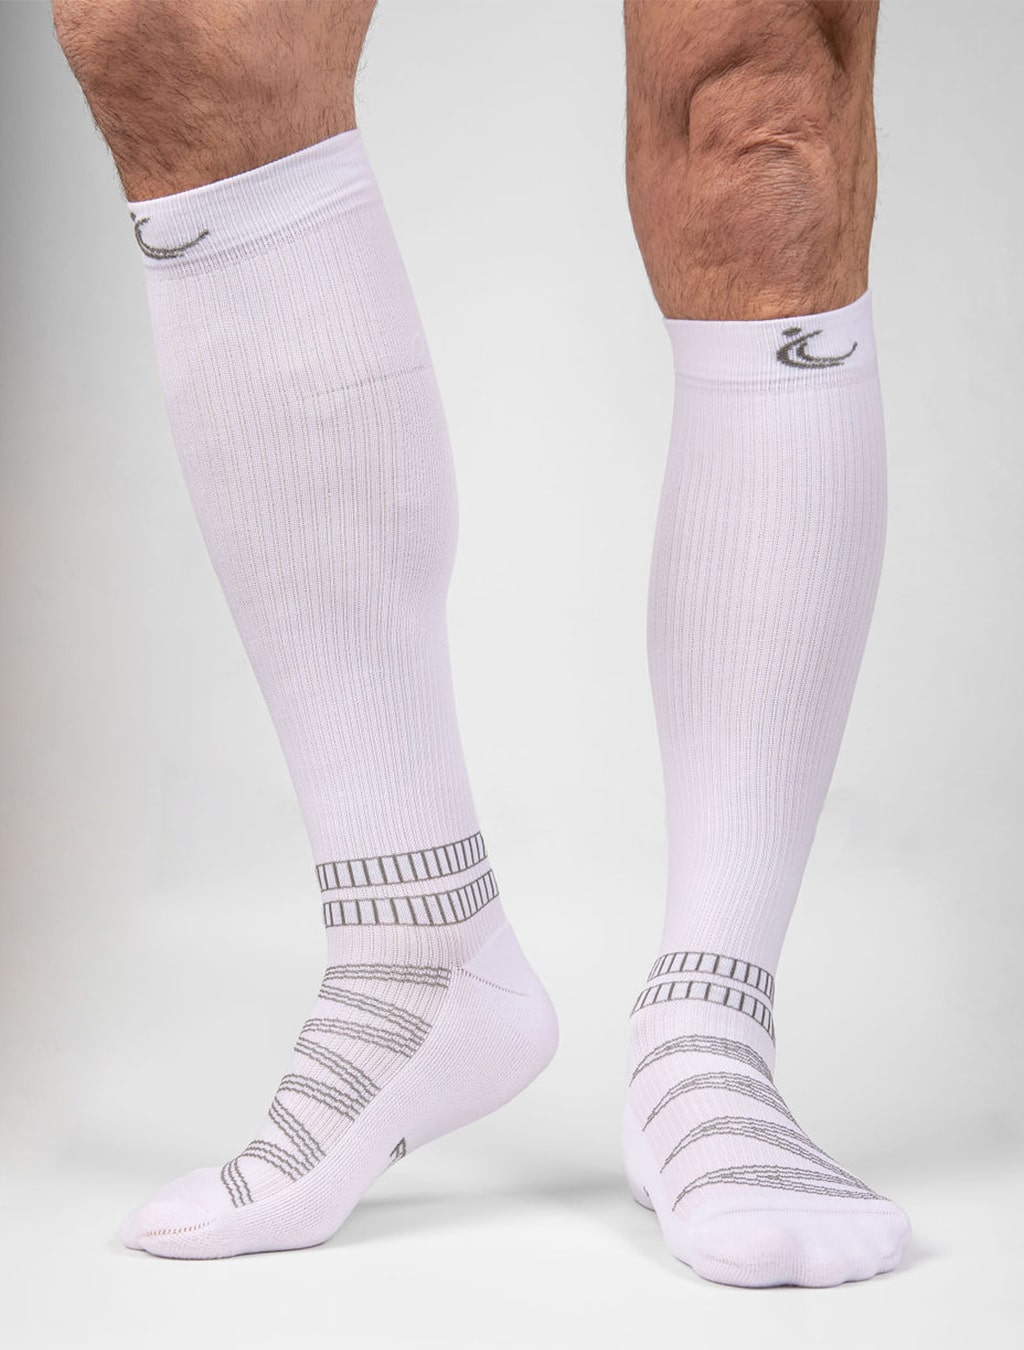 FITLEGS Sports Compression Socks White Front